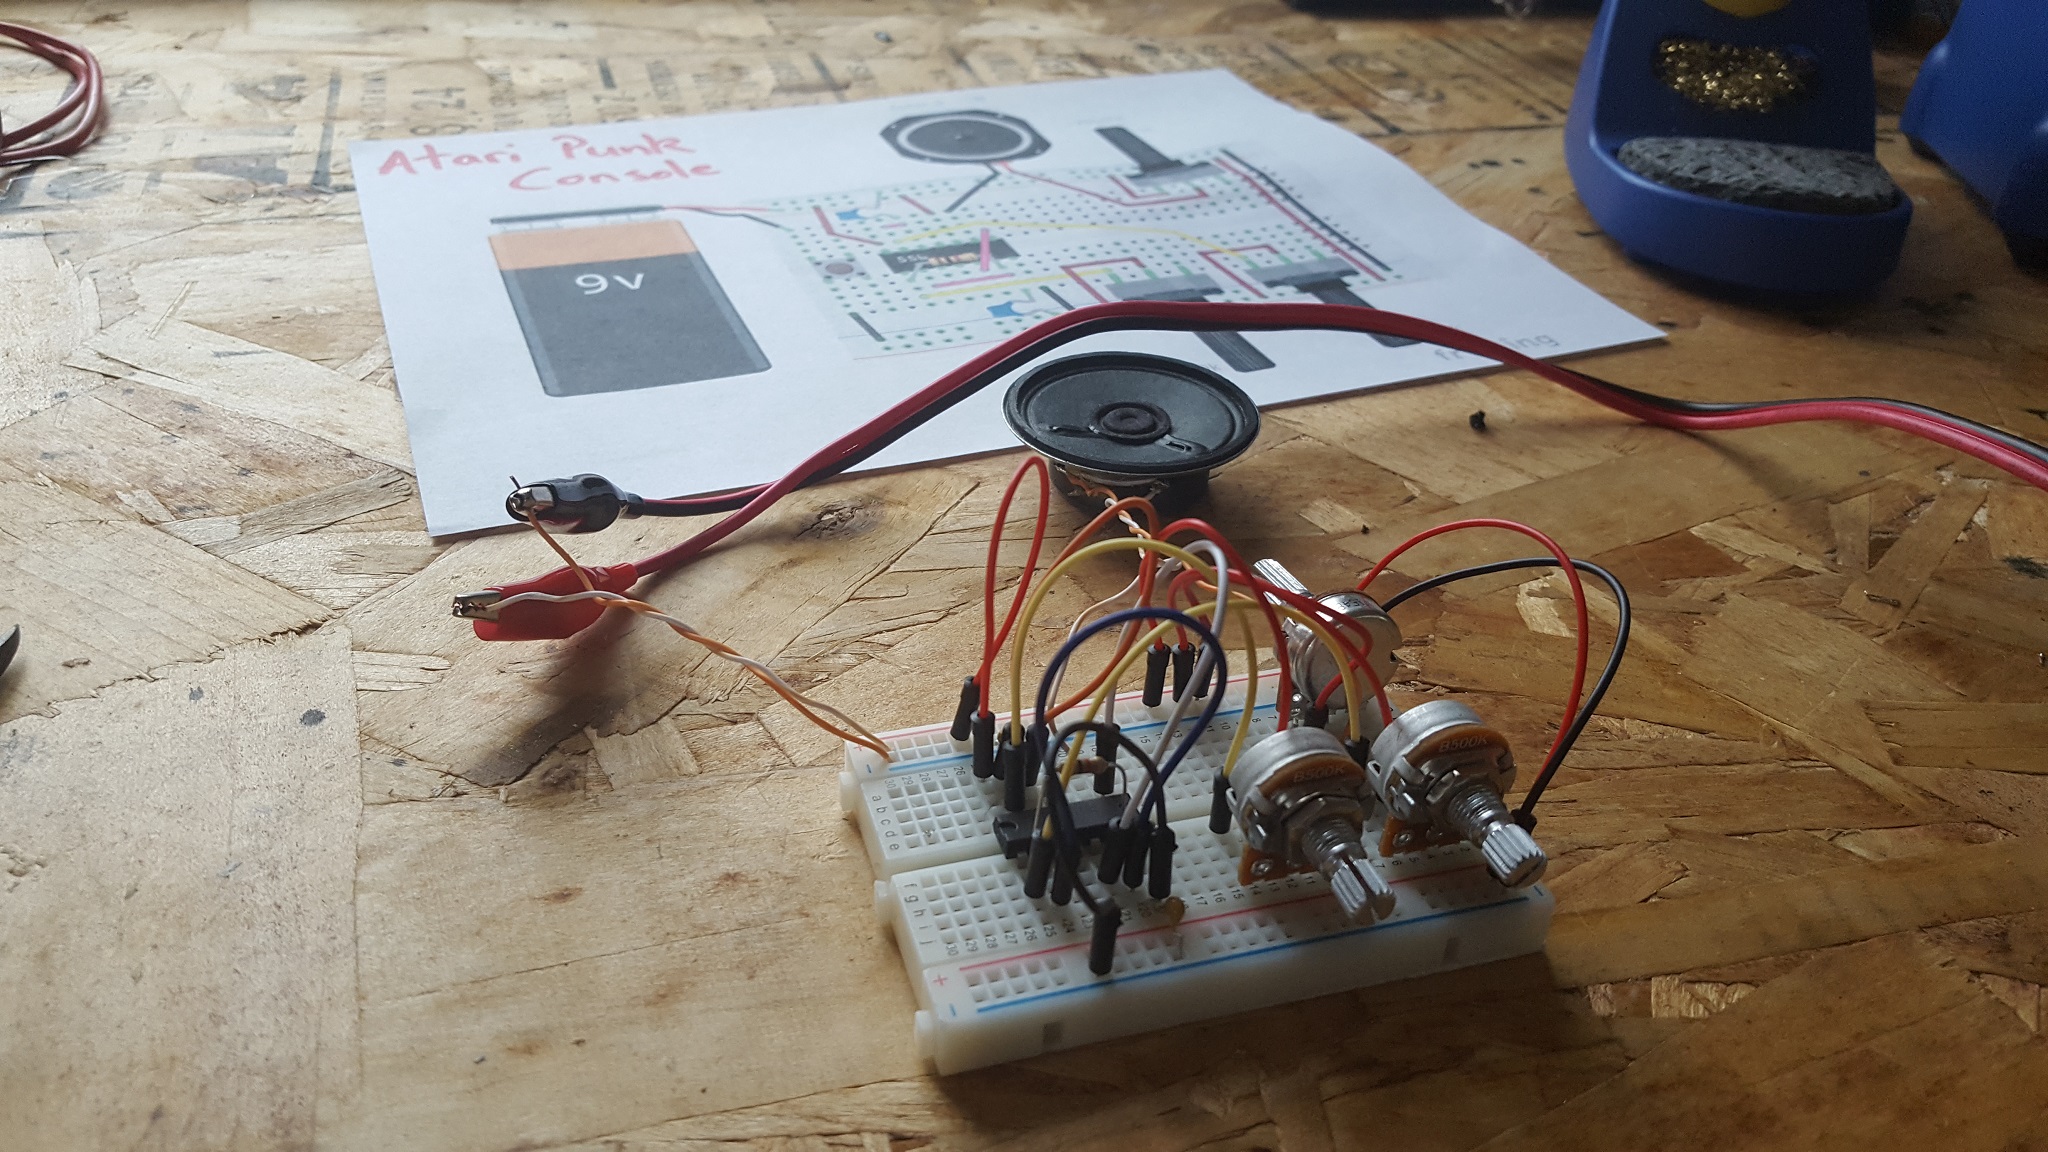 Atari Punk Console synthesizer build workshop for SOUNDRY camp